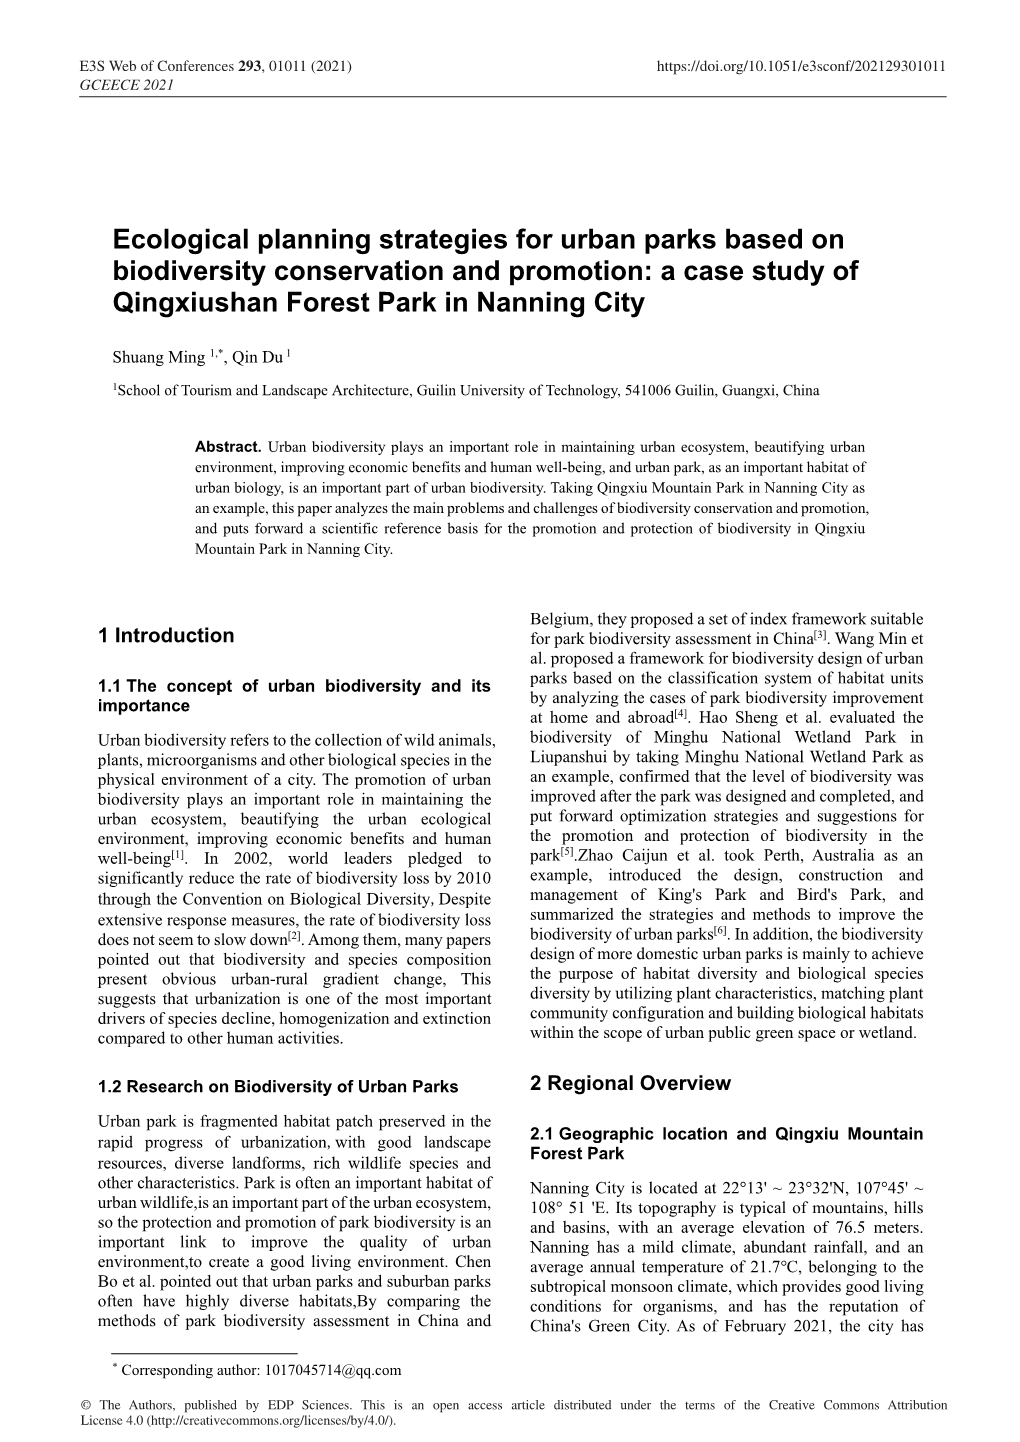 Ecological Planning Strategies for Urban Parks Based on Biodiversity Conservation and Promotion: a Case Study of Qingxiushan Forest Park in Nanning City